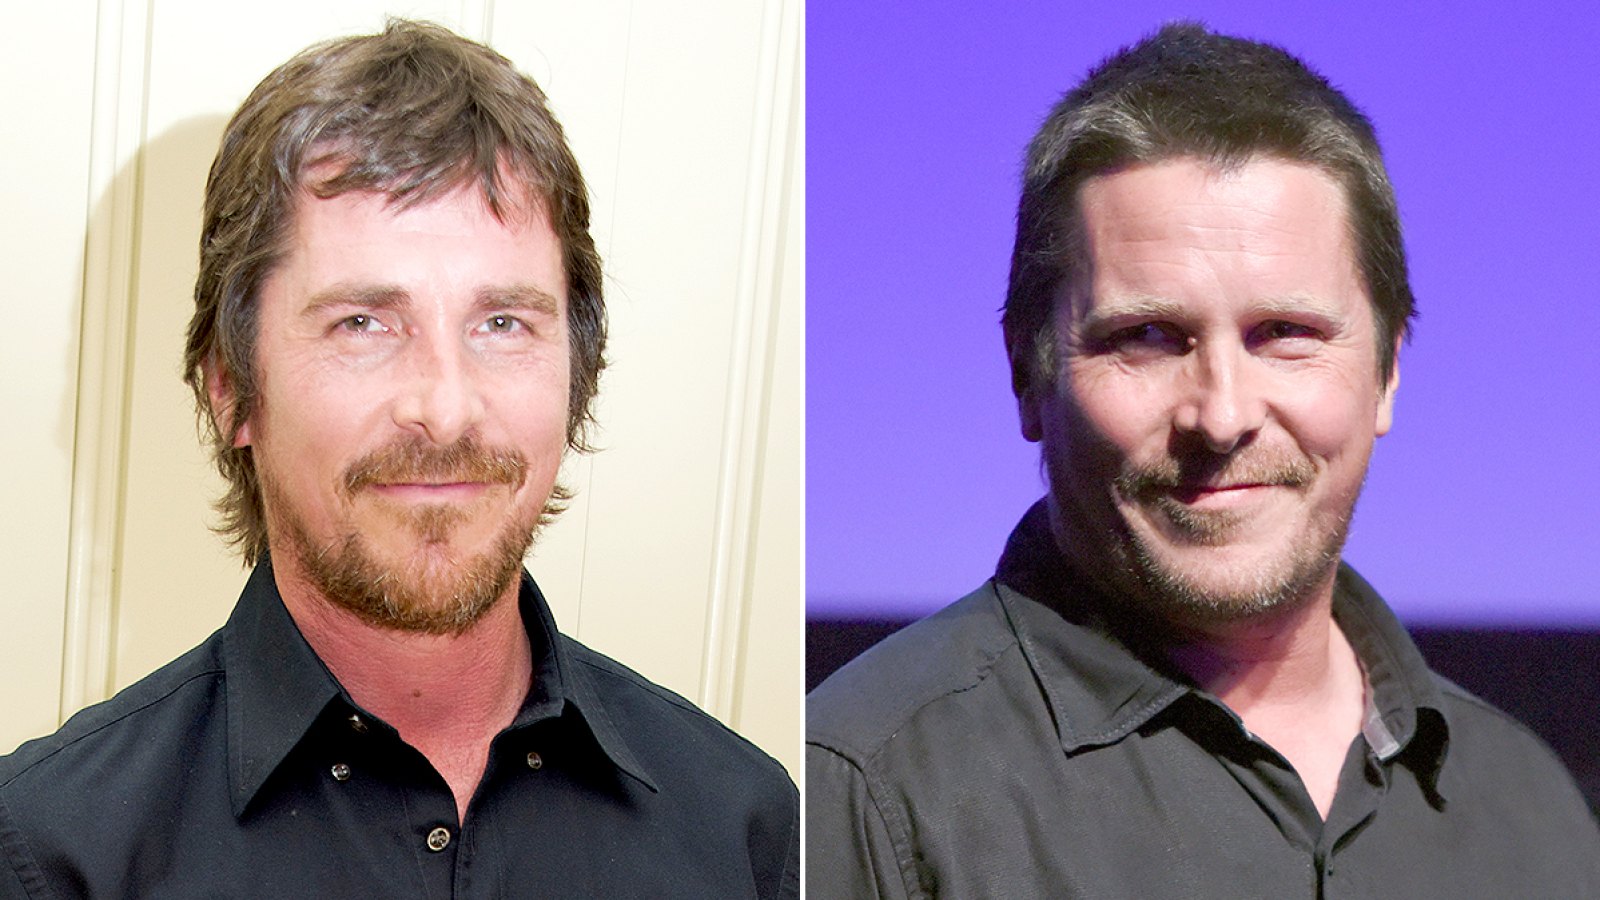 Christian Bale in April and Christian Bale in September.